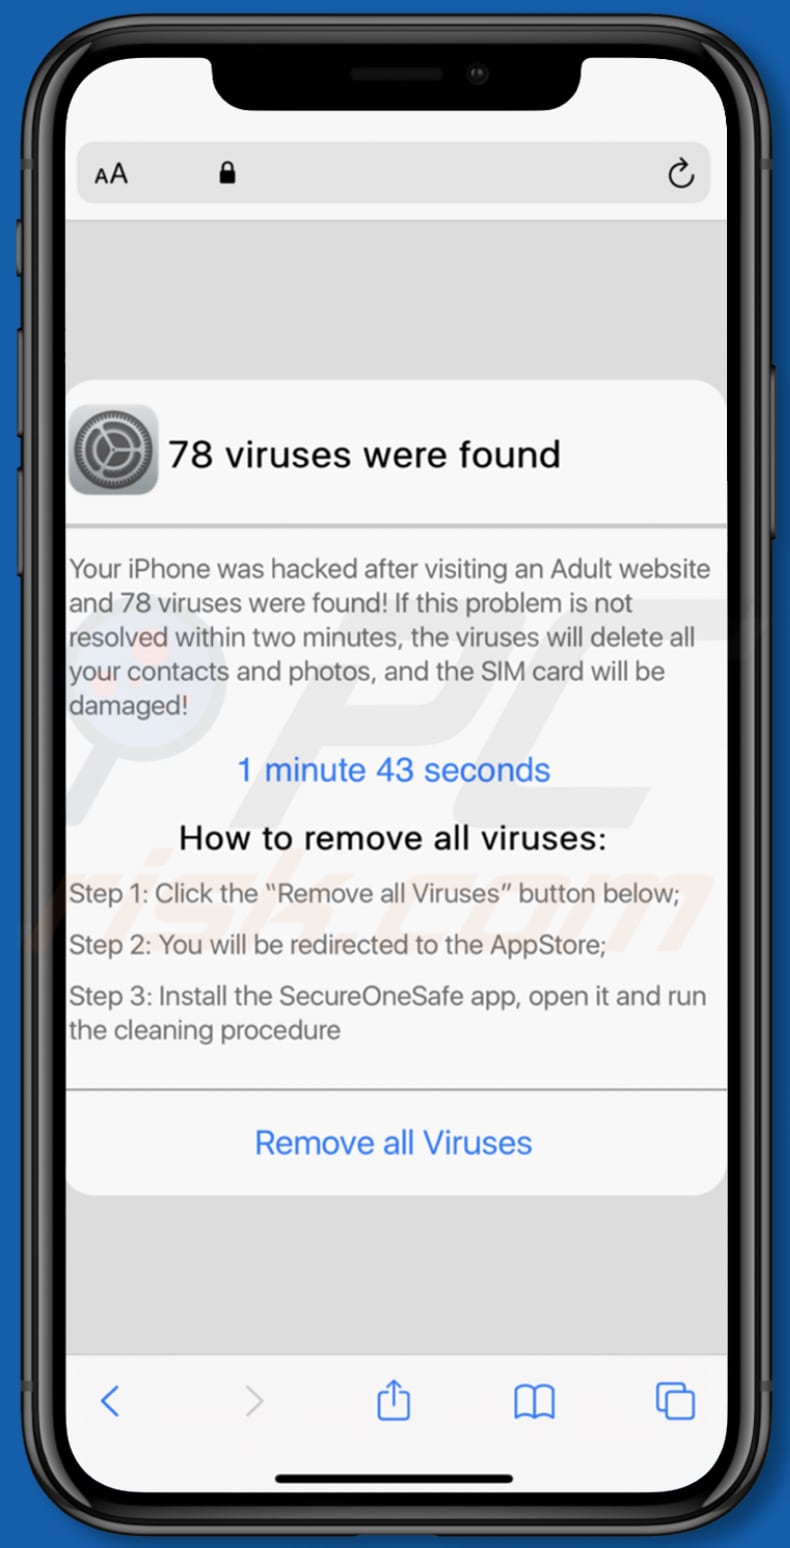 Can you get hacked by visiting a website on iPhone?